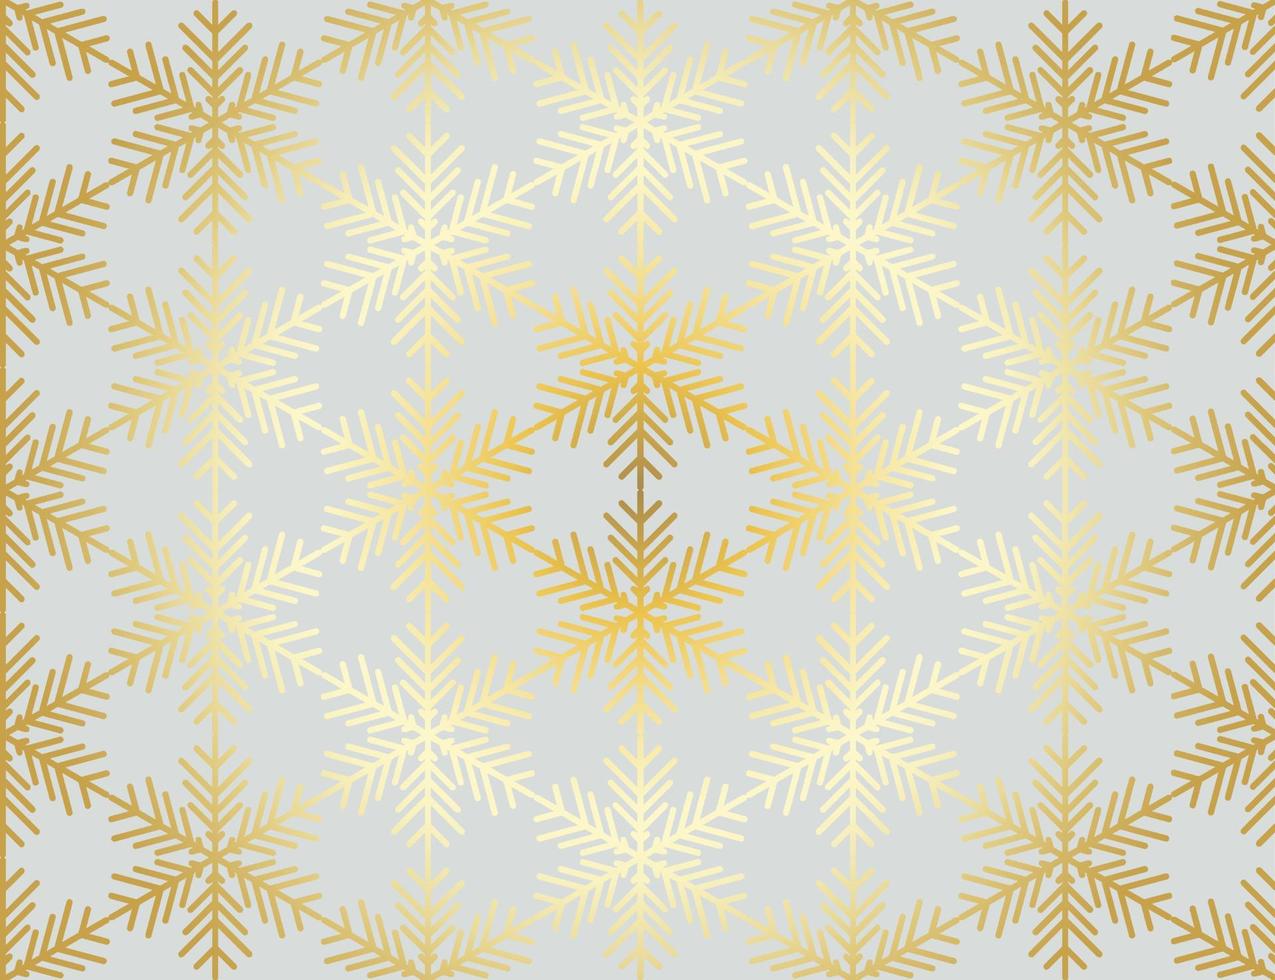 Christmas card. Snowflakes background. Winter seamless pattern. vector